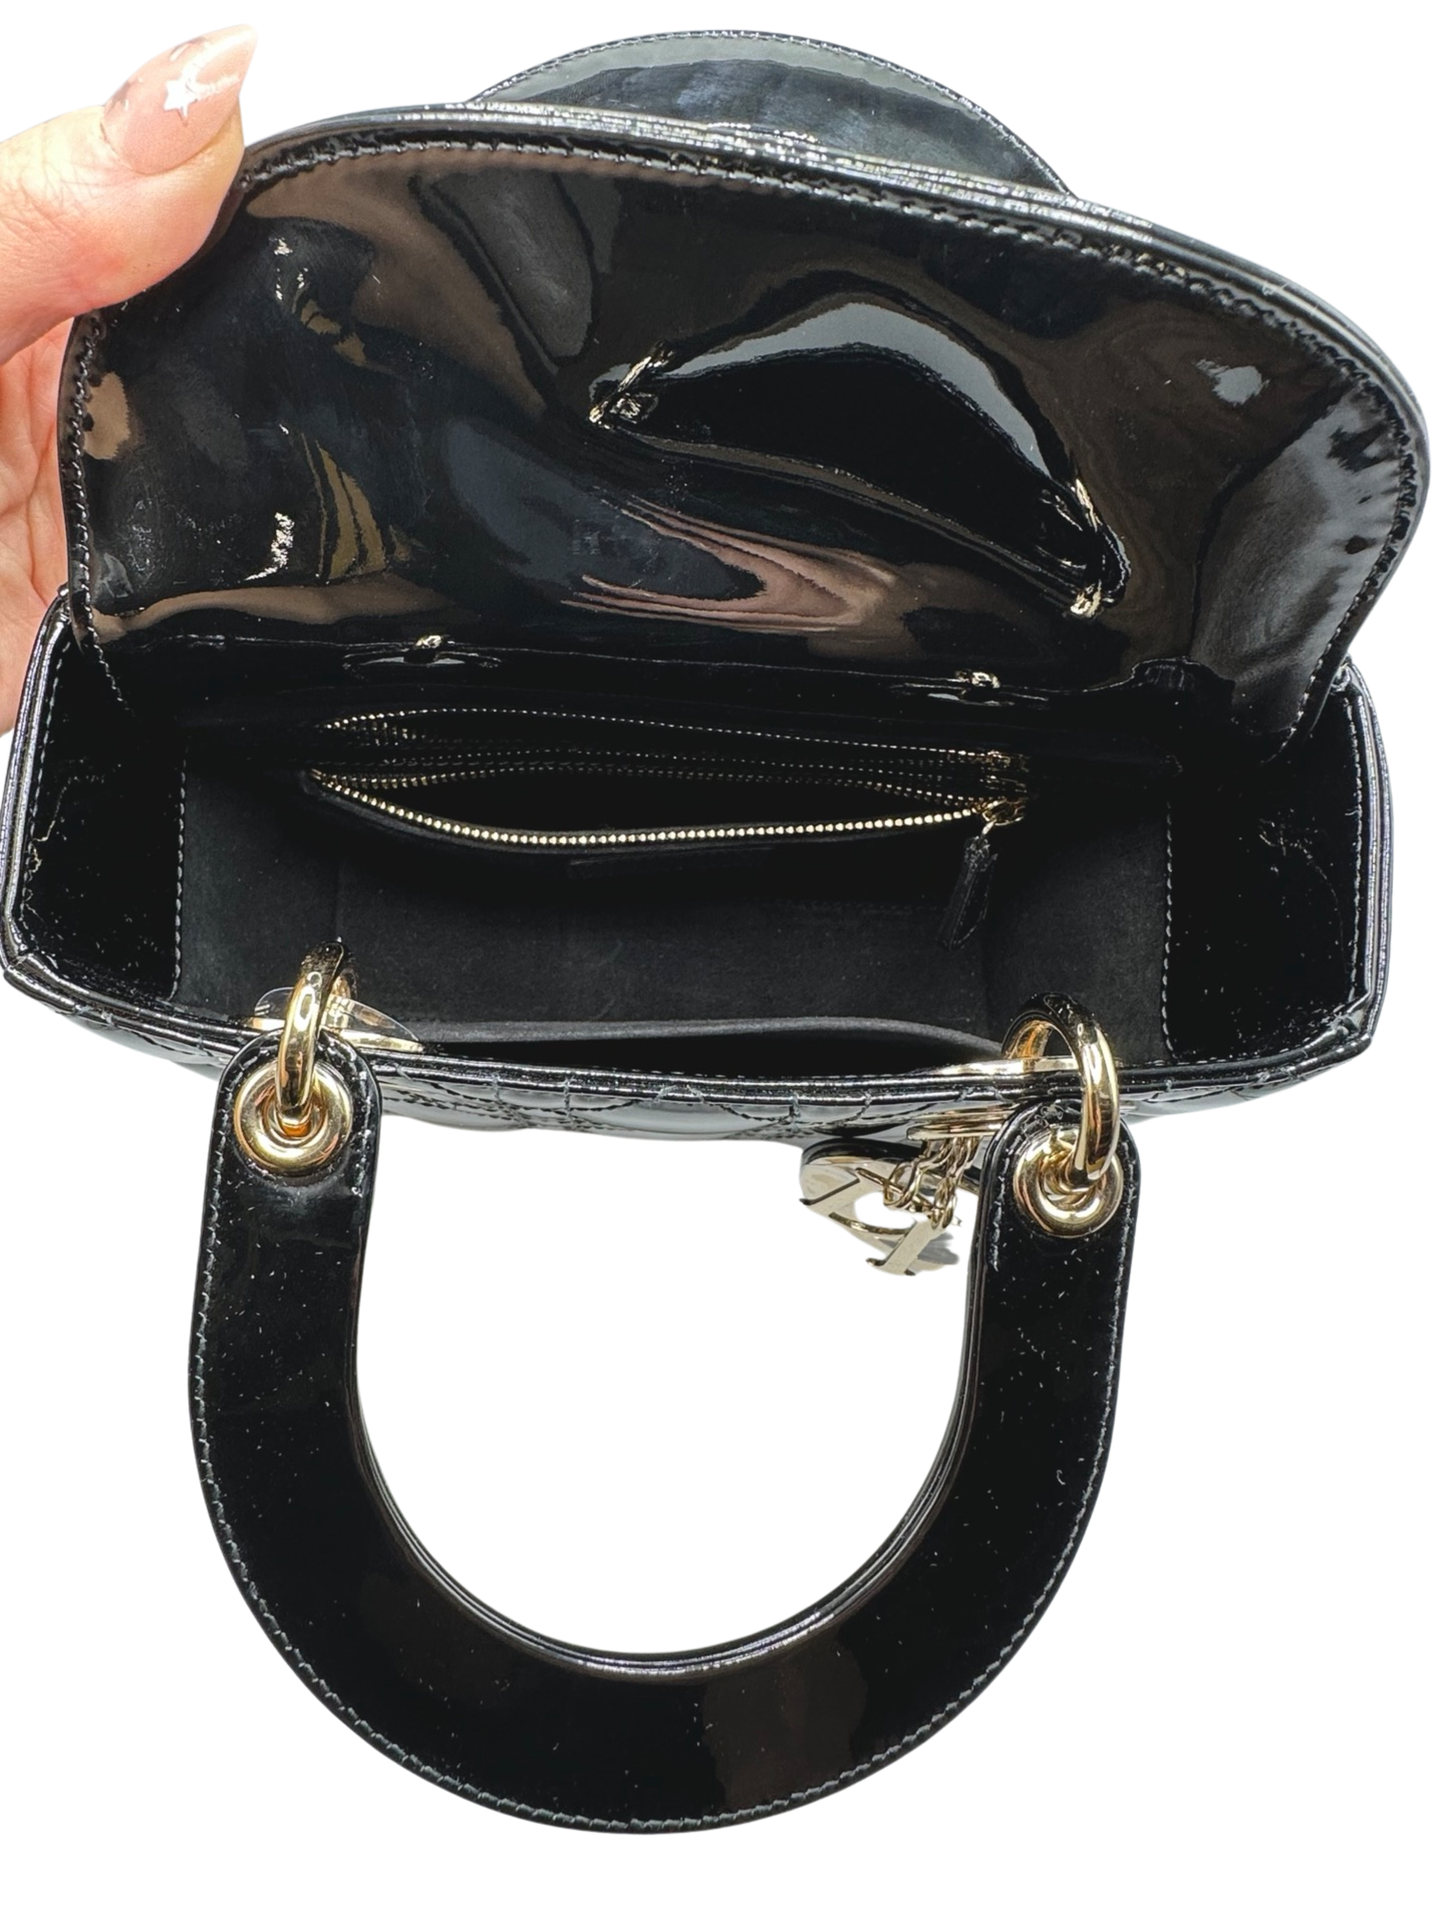 Top of small lady dior black patent leather bag with the flap open